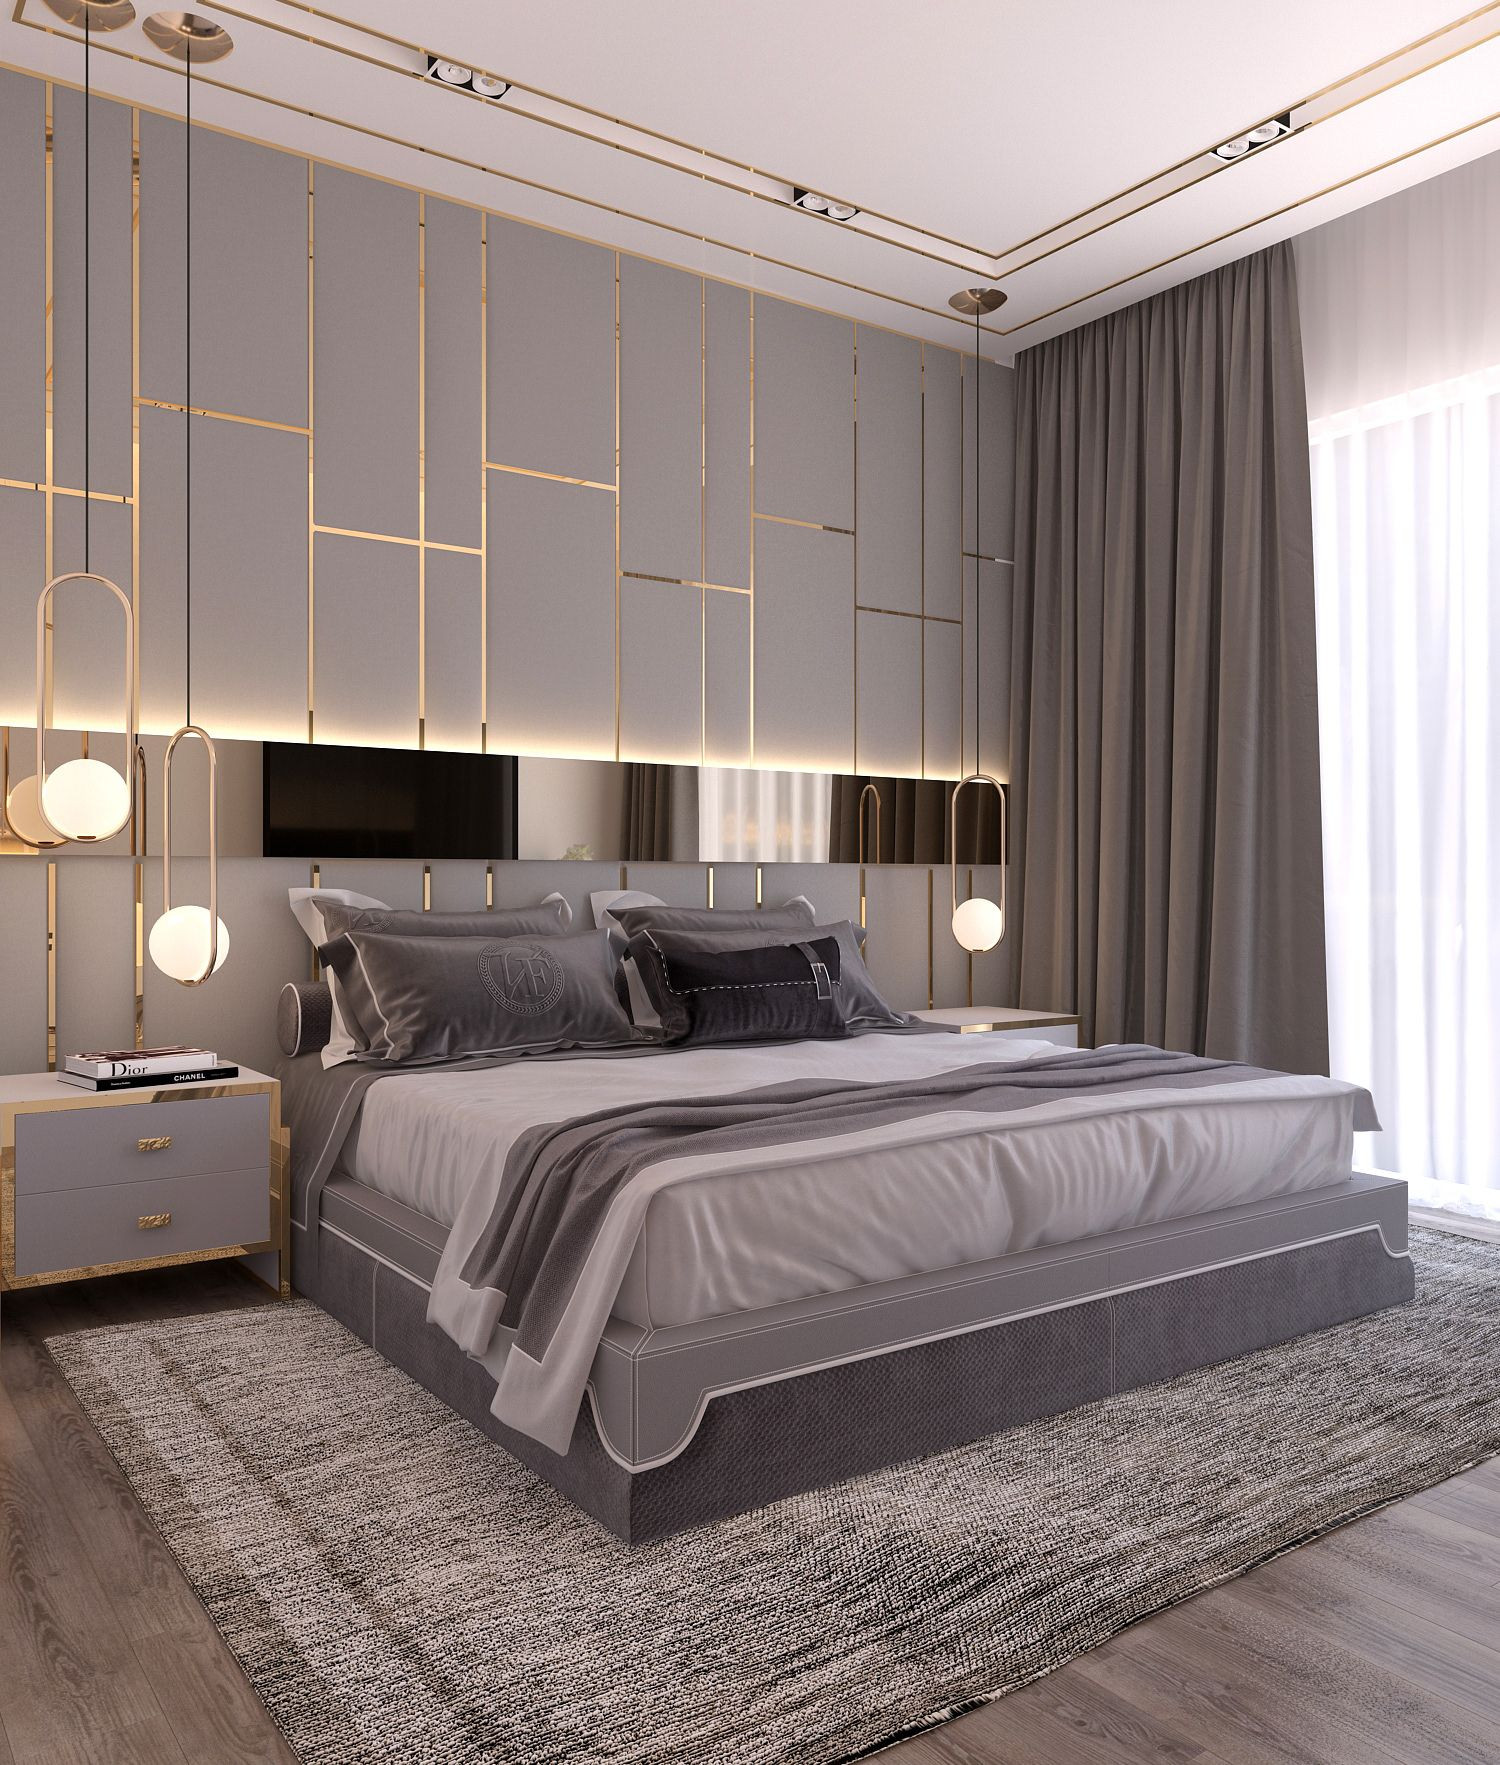 Modern Style Bedroom
 Modern style bedroom Dubai project on Behance in 2019